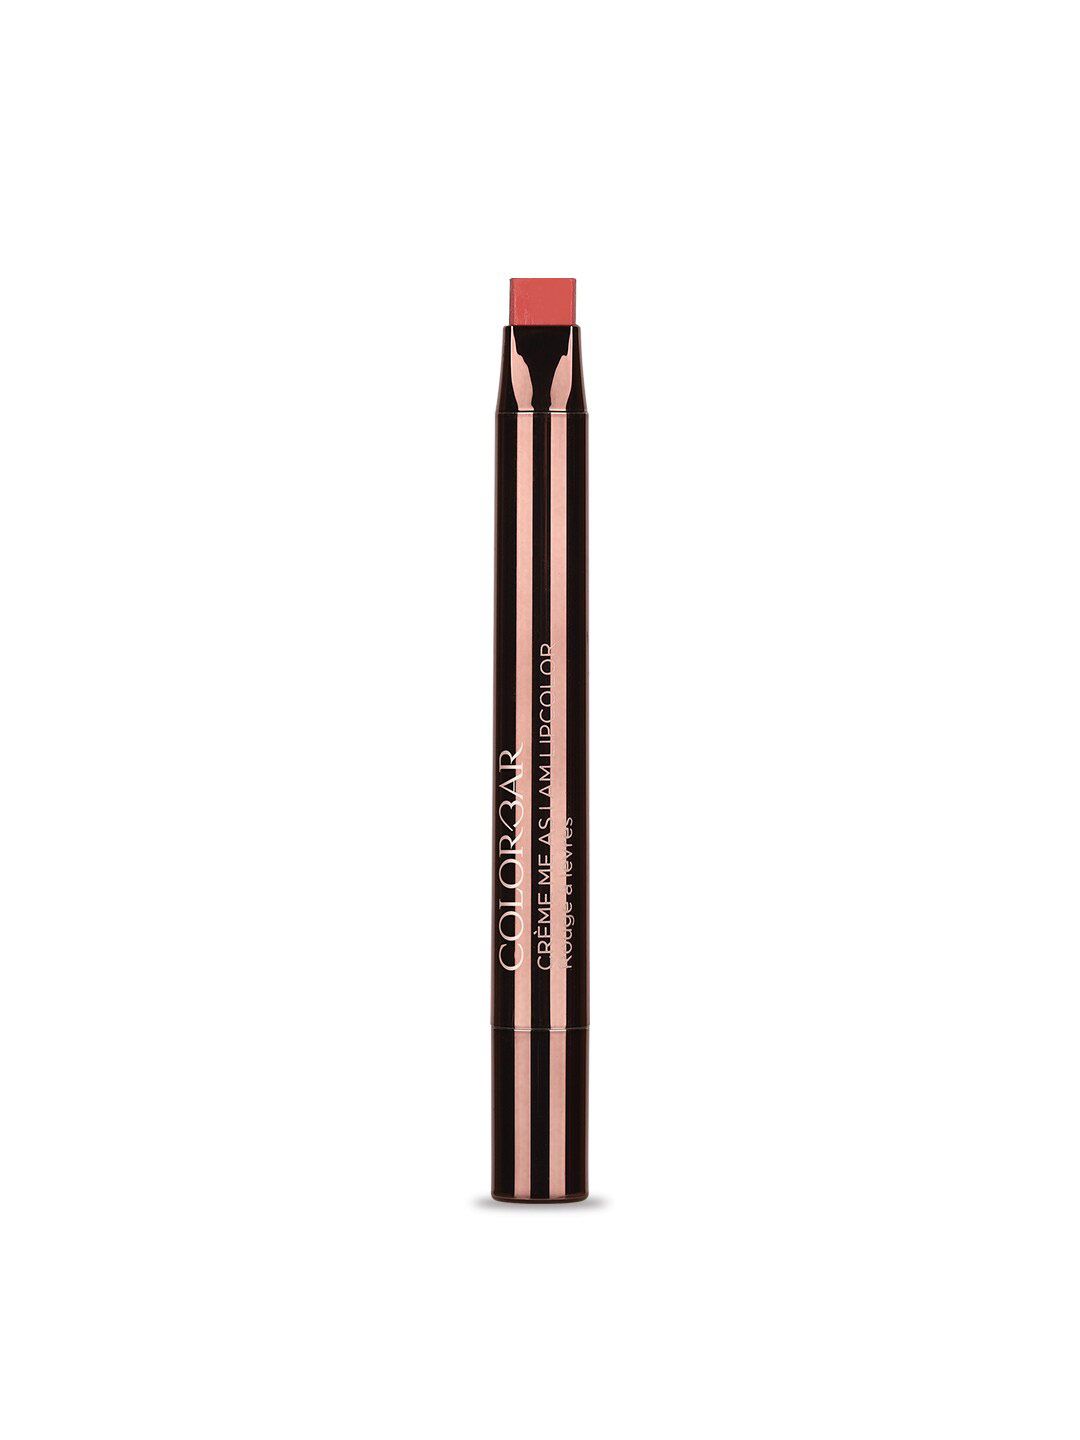 Colorbar Crme me as I am Lipstick - Peach Tenderly - 010 Price in India